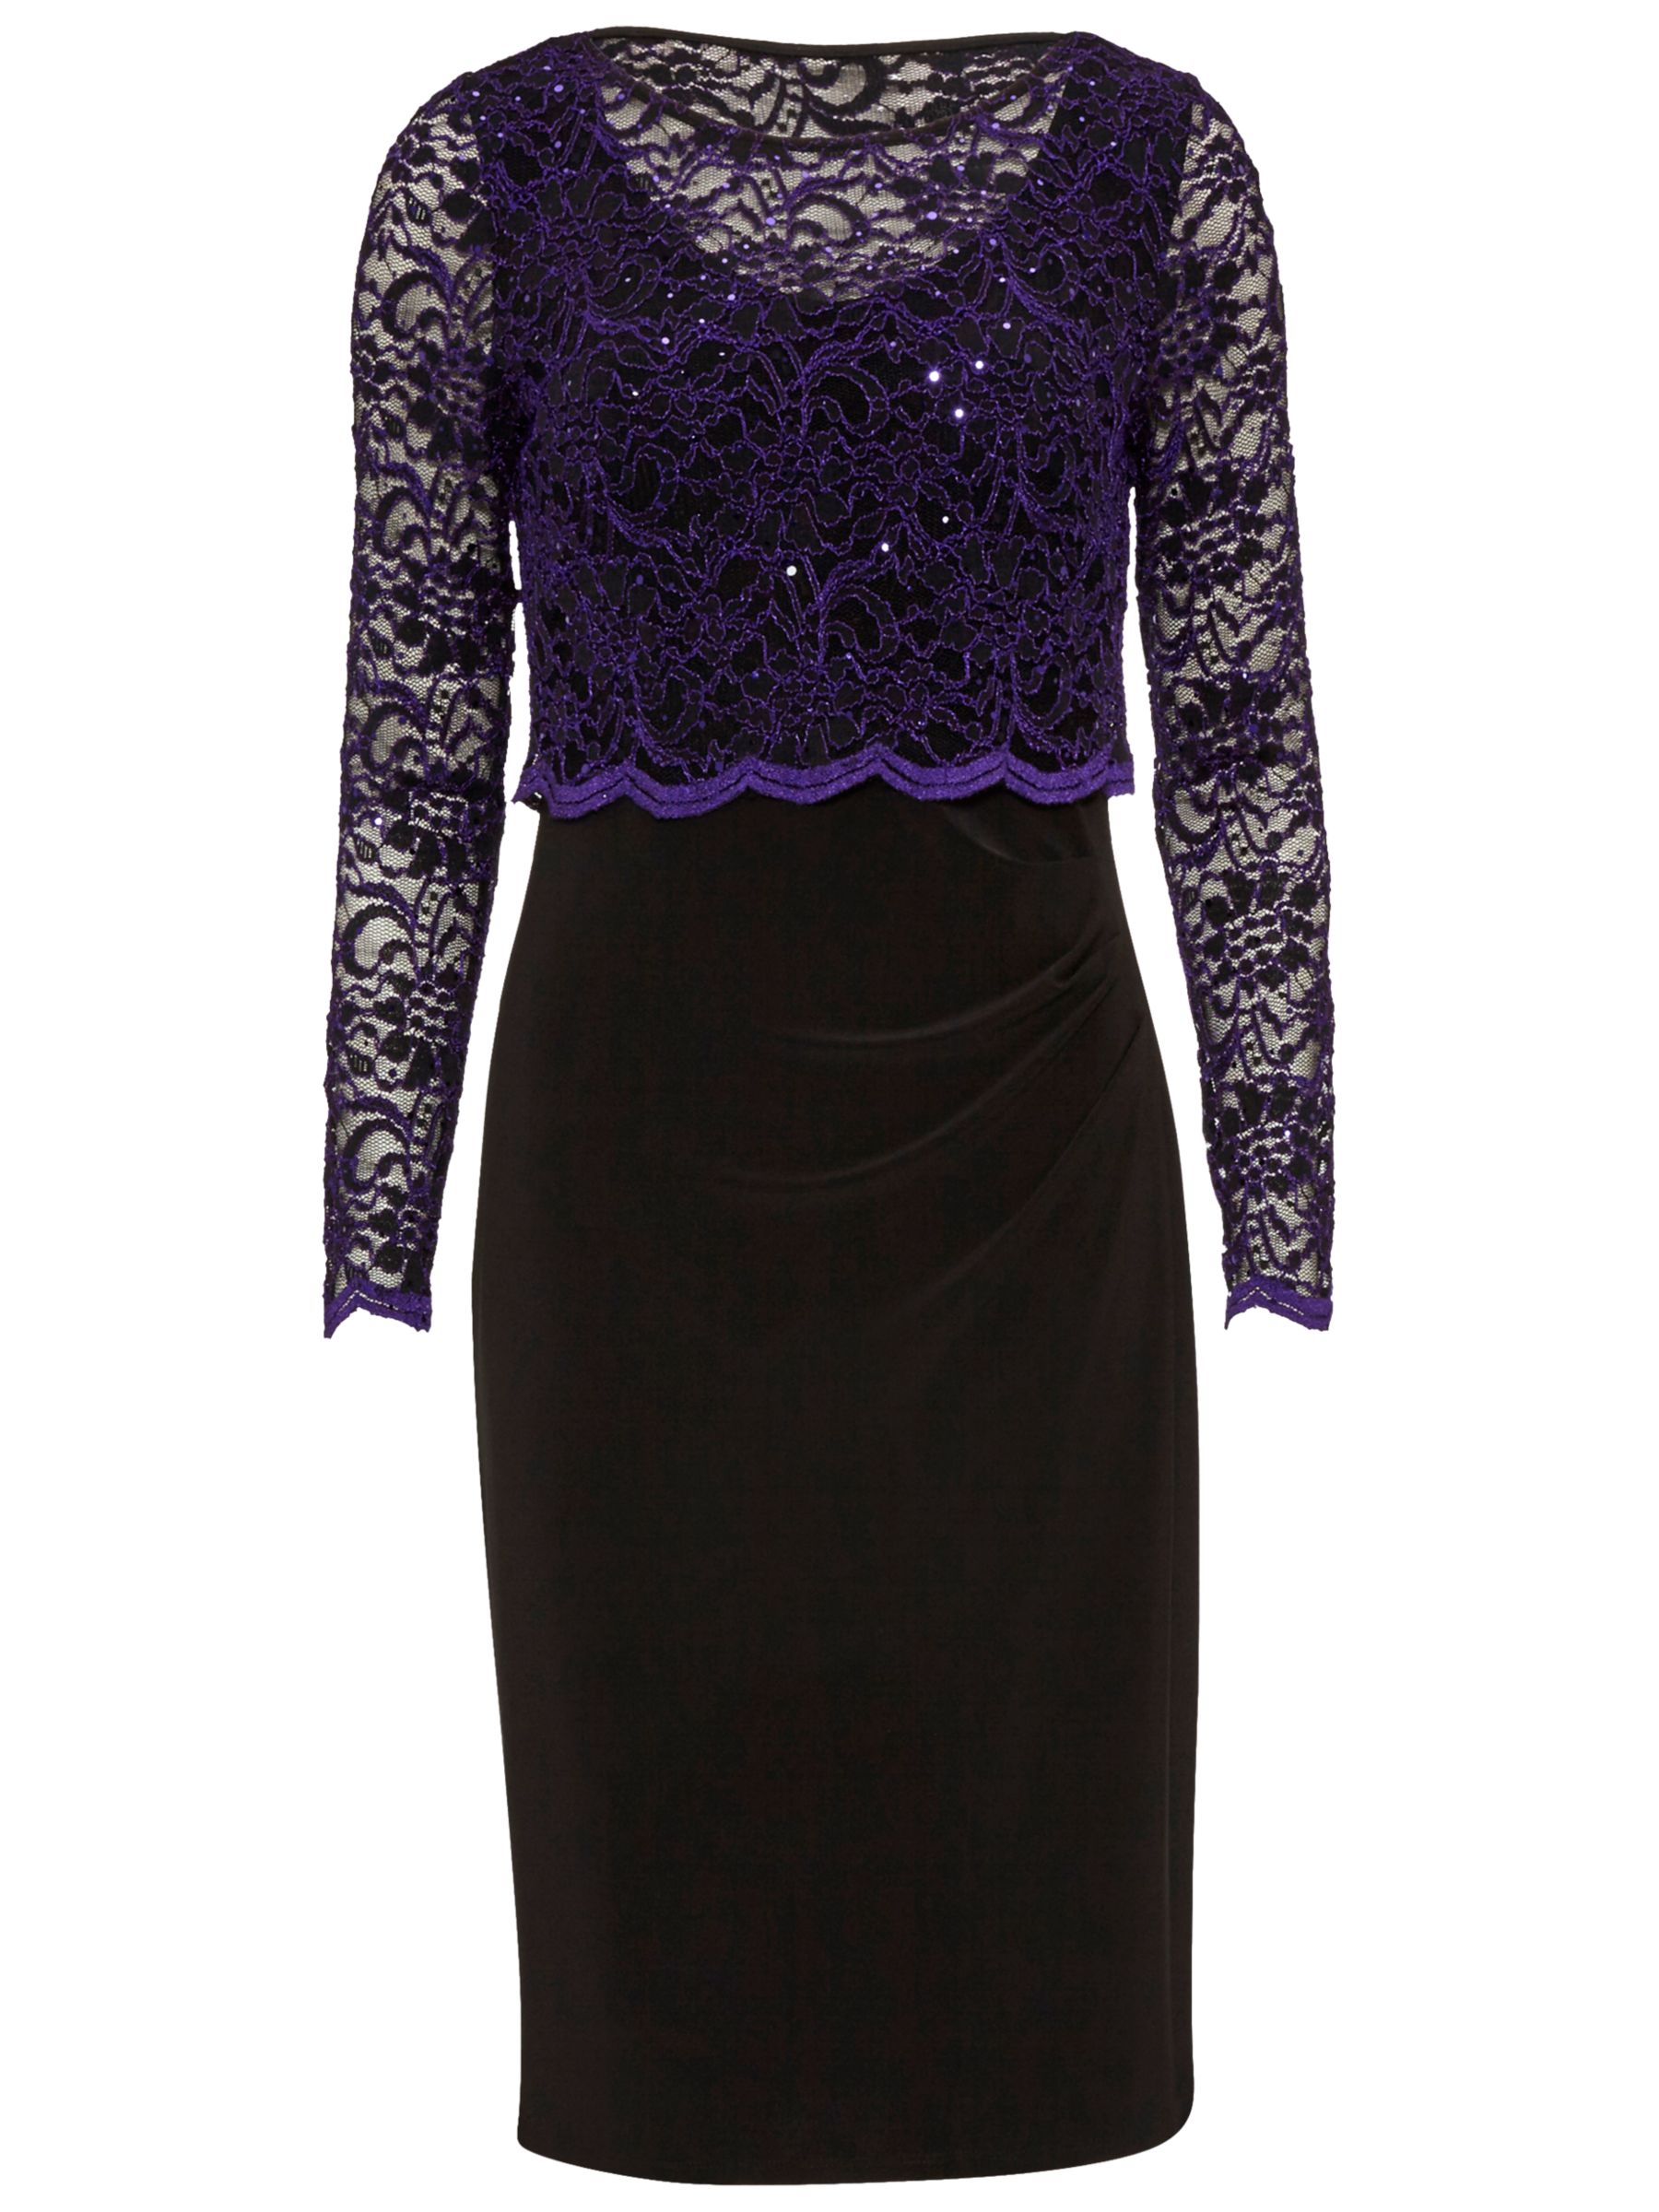 Gina Bacconi Dress With Lace Overtop, Aubergine at John Lewis & Partners